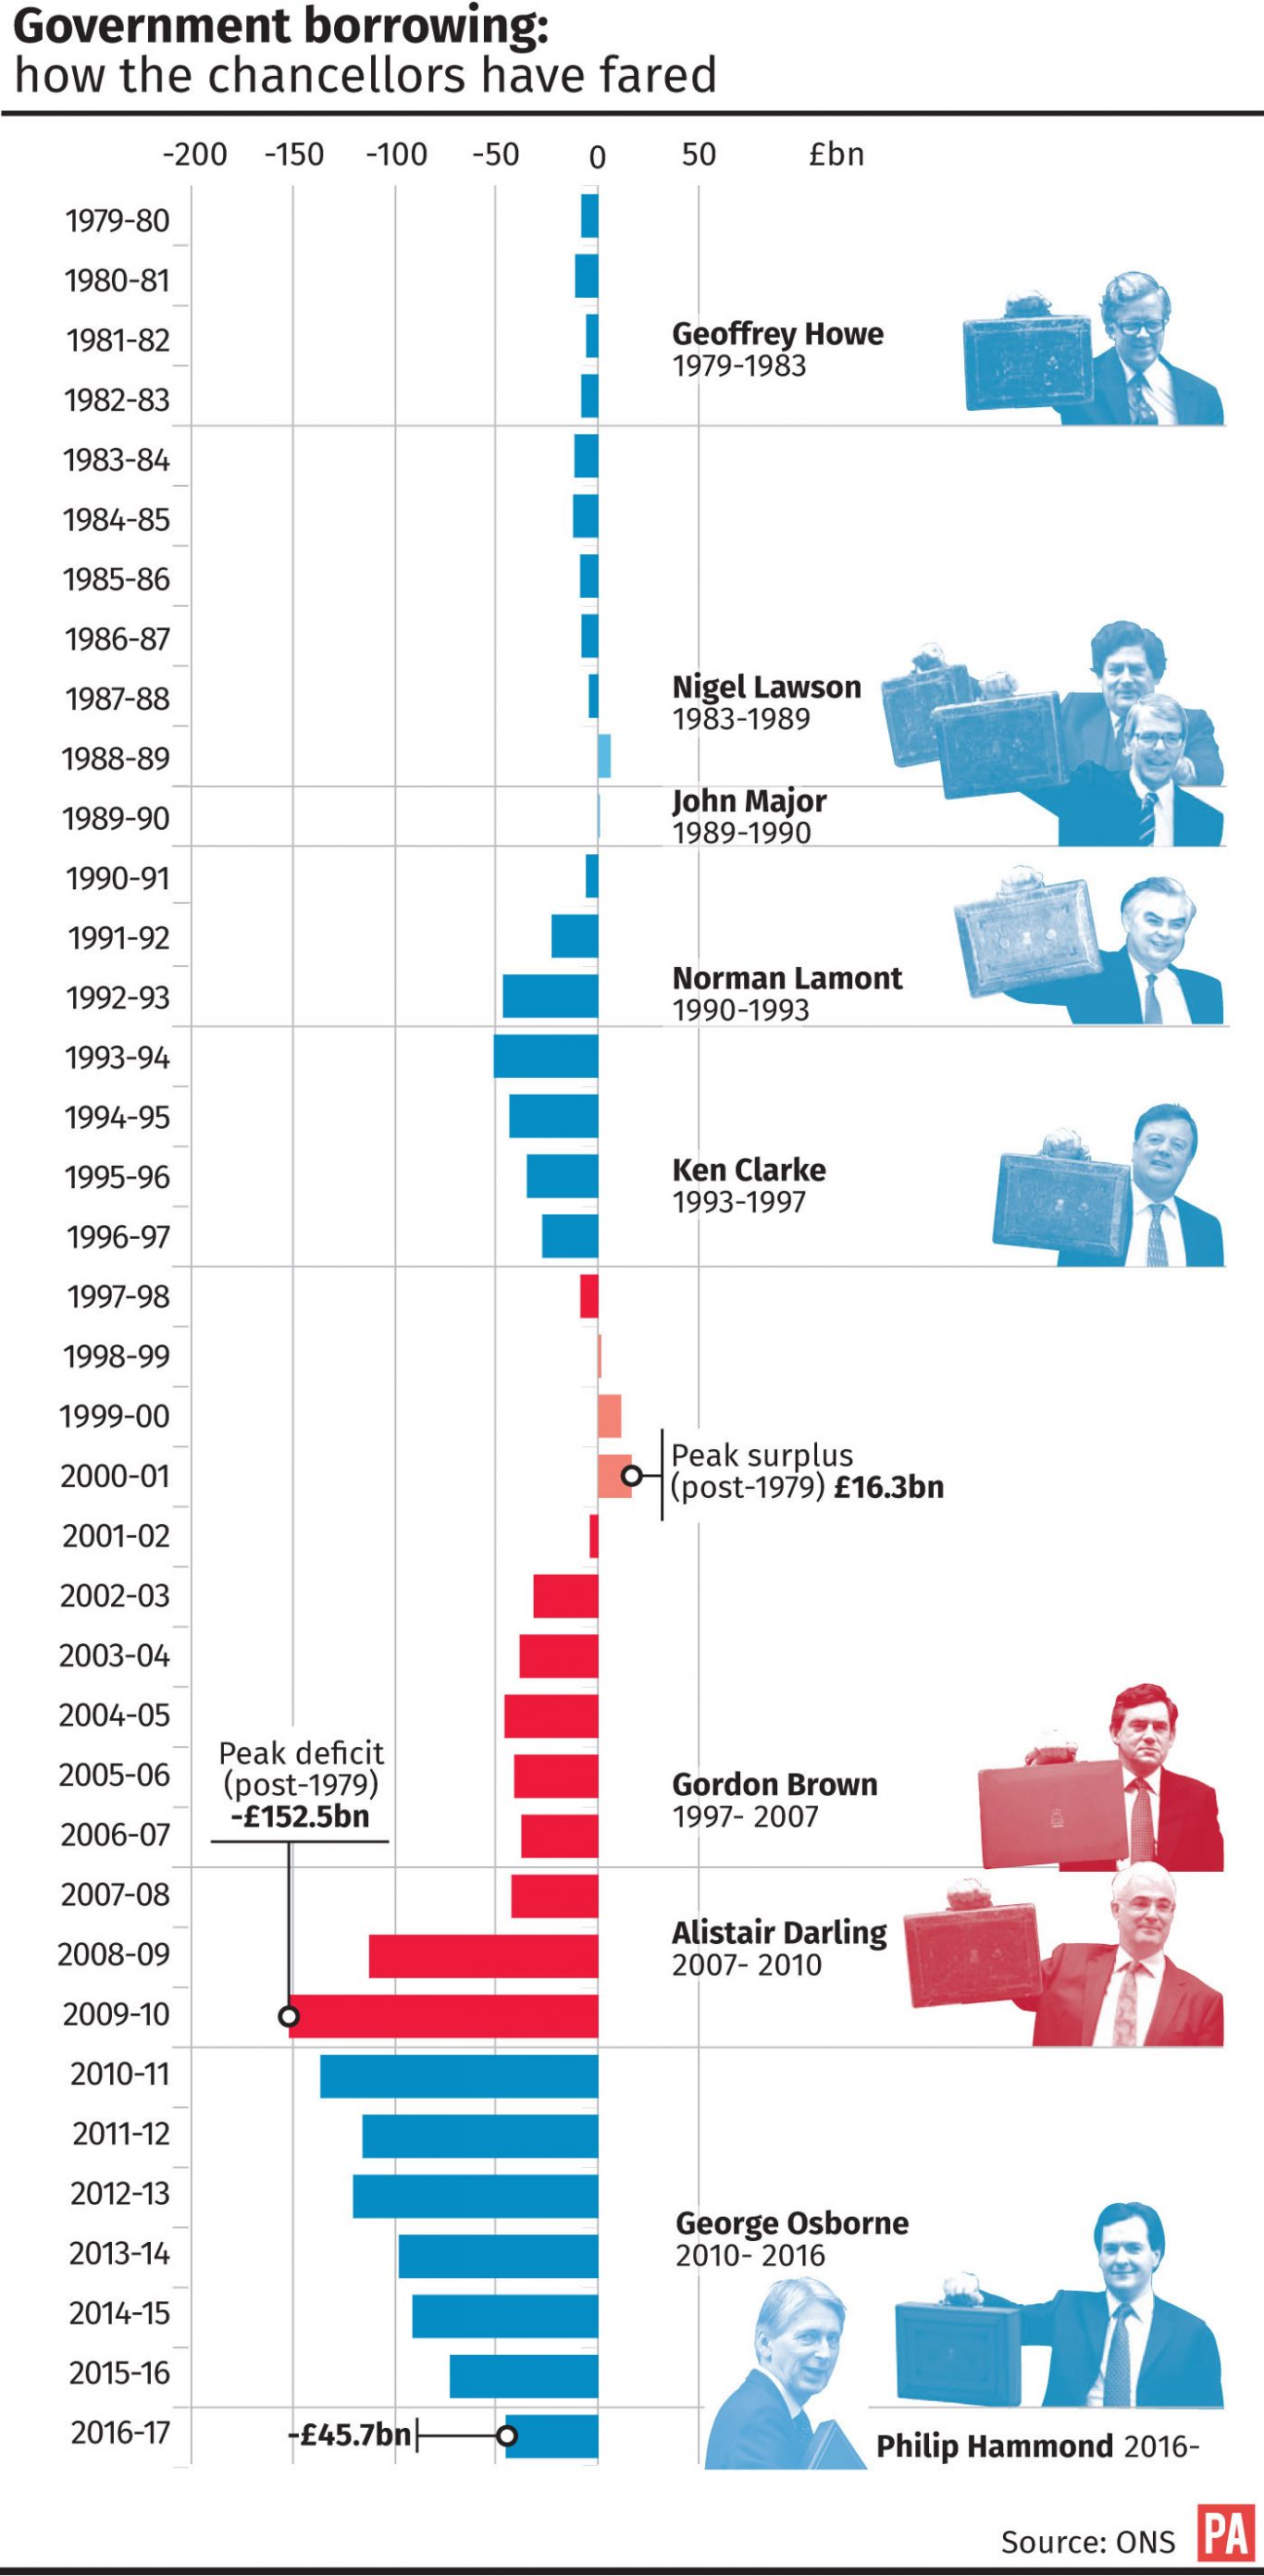 Government borrowing: how the chancellors have fared